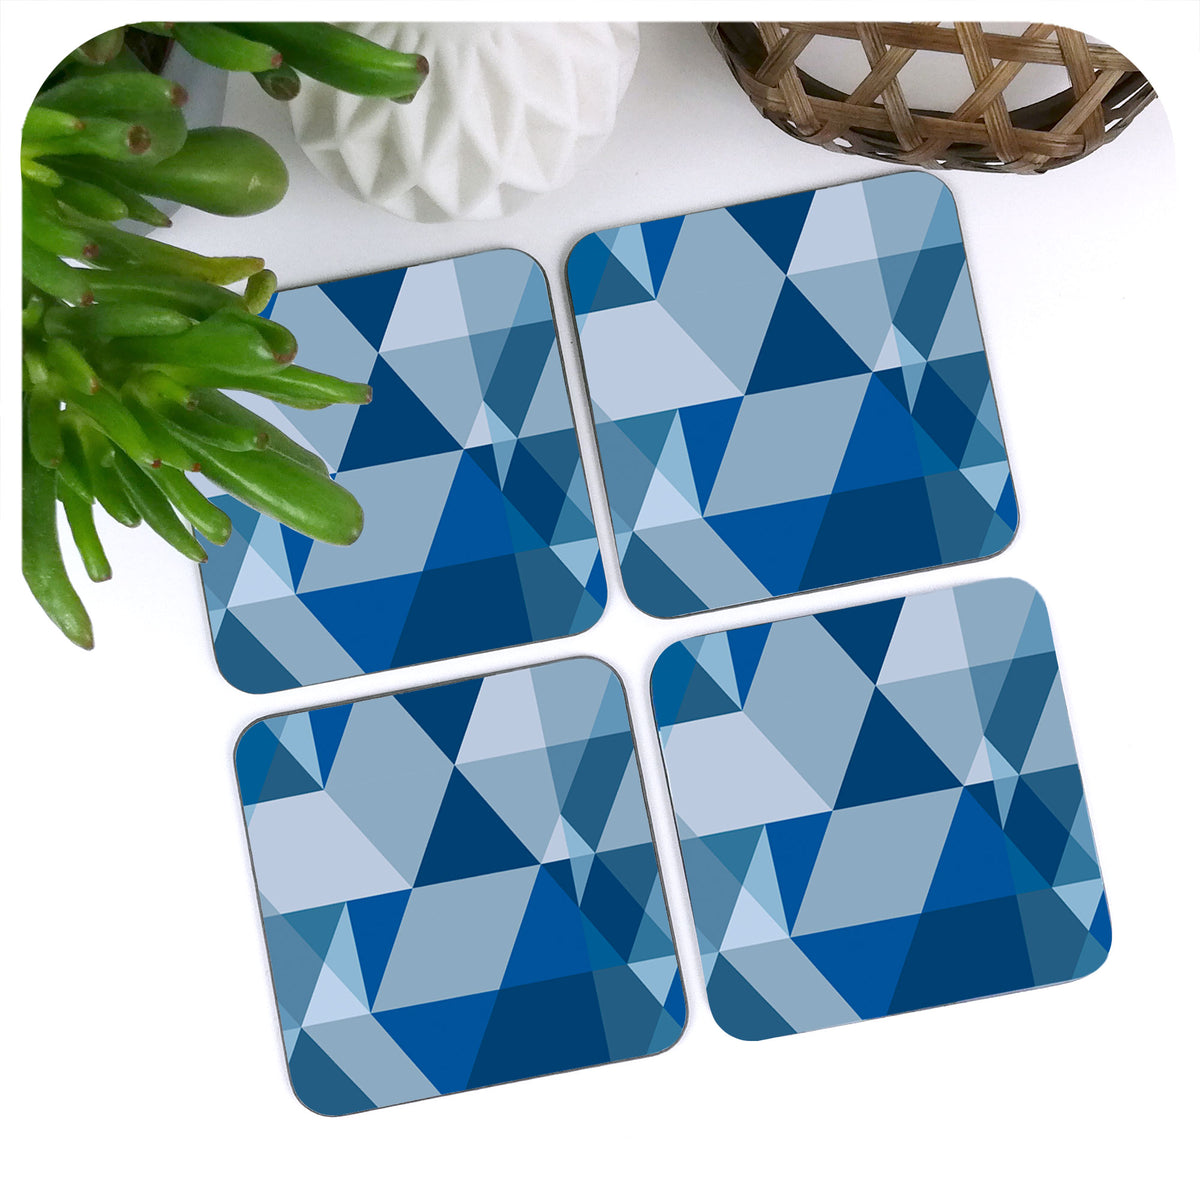 Scandi Geometric Coasters in Blue and Grey | The Inkabilly Emporium